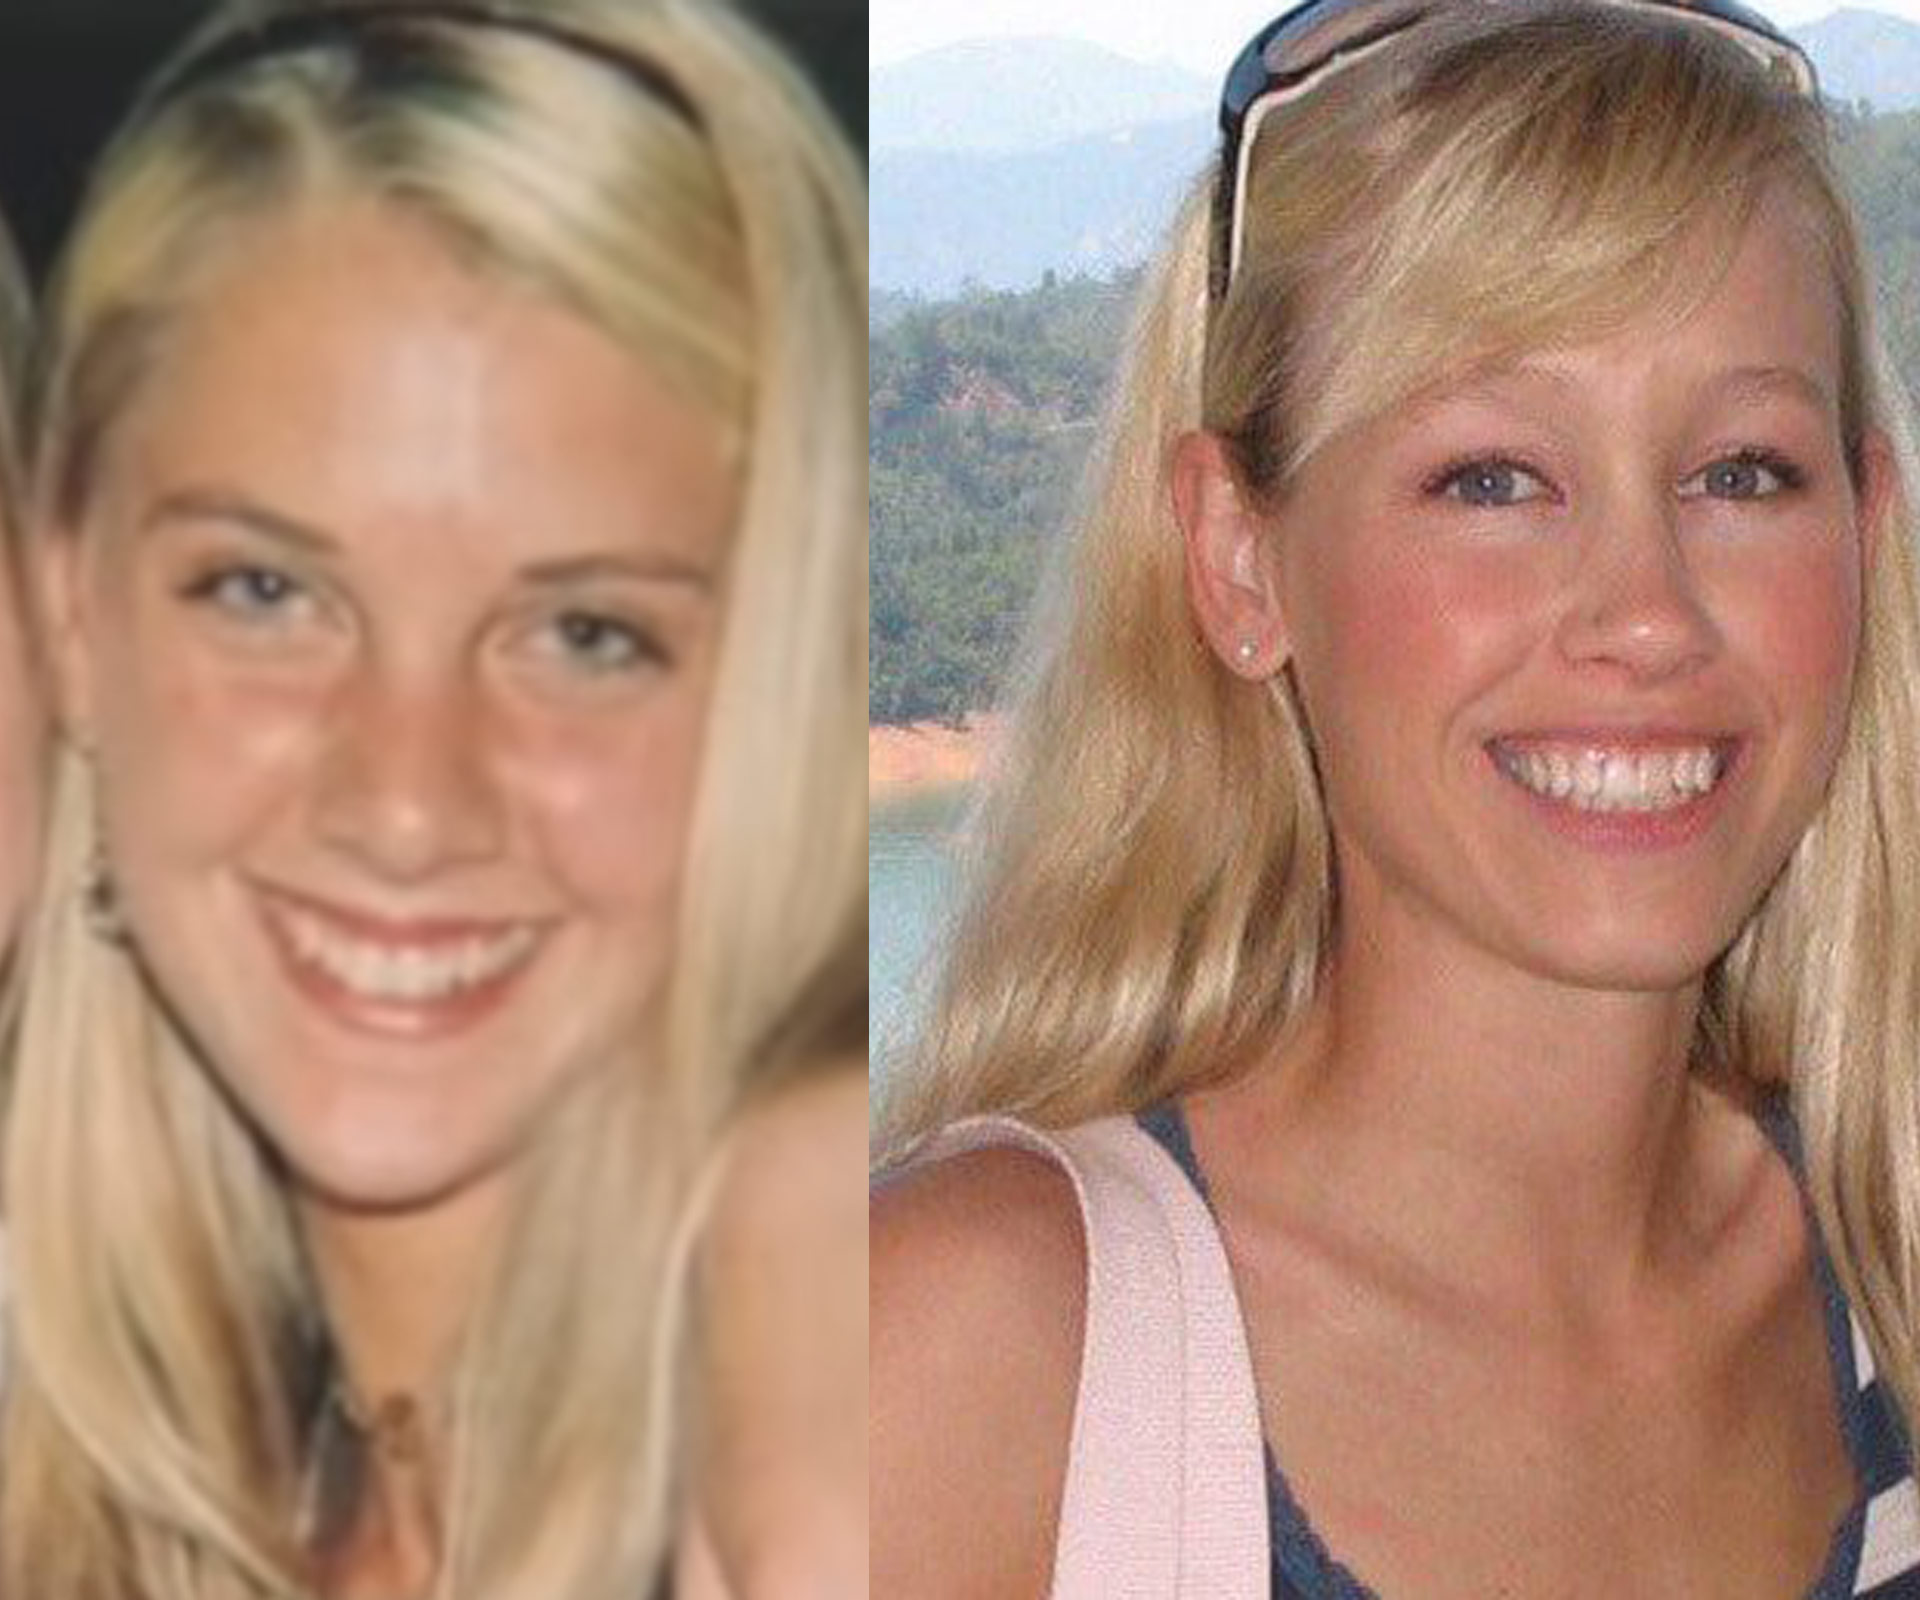 A mysterious coincidence: Sherri Papini’s schoolfriend also vanished in same area while jogging